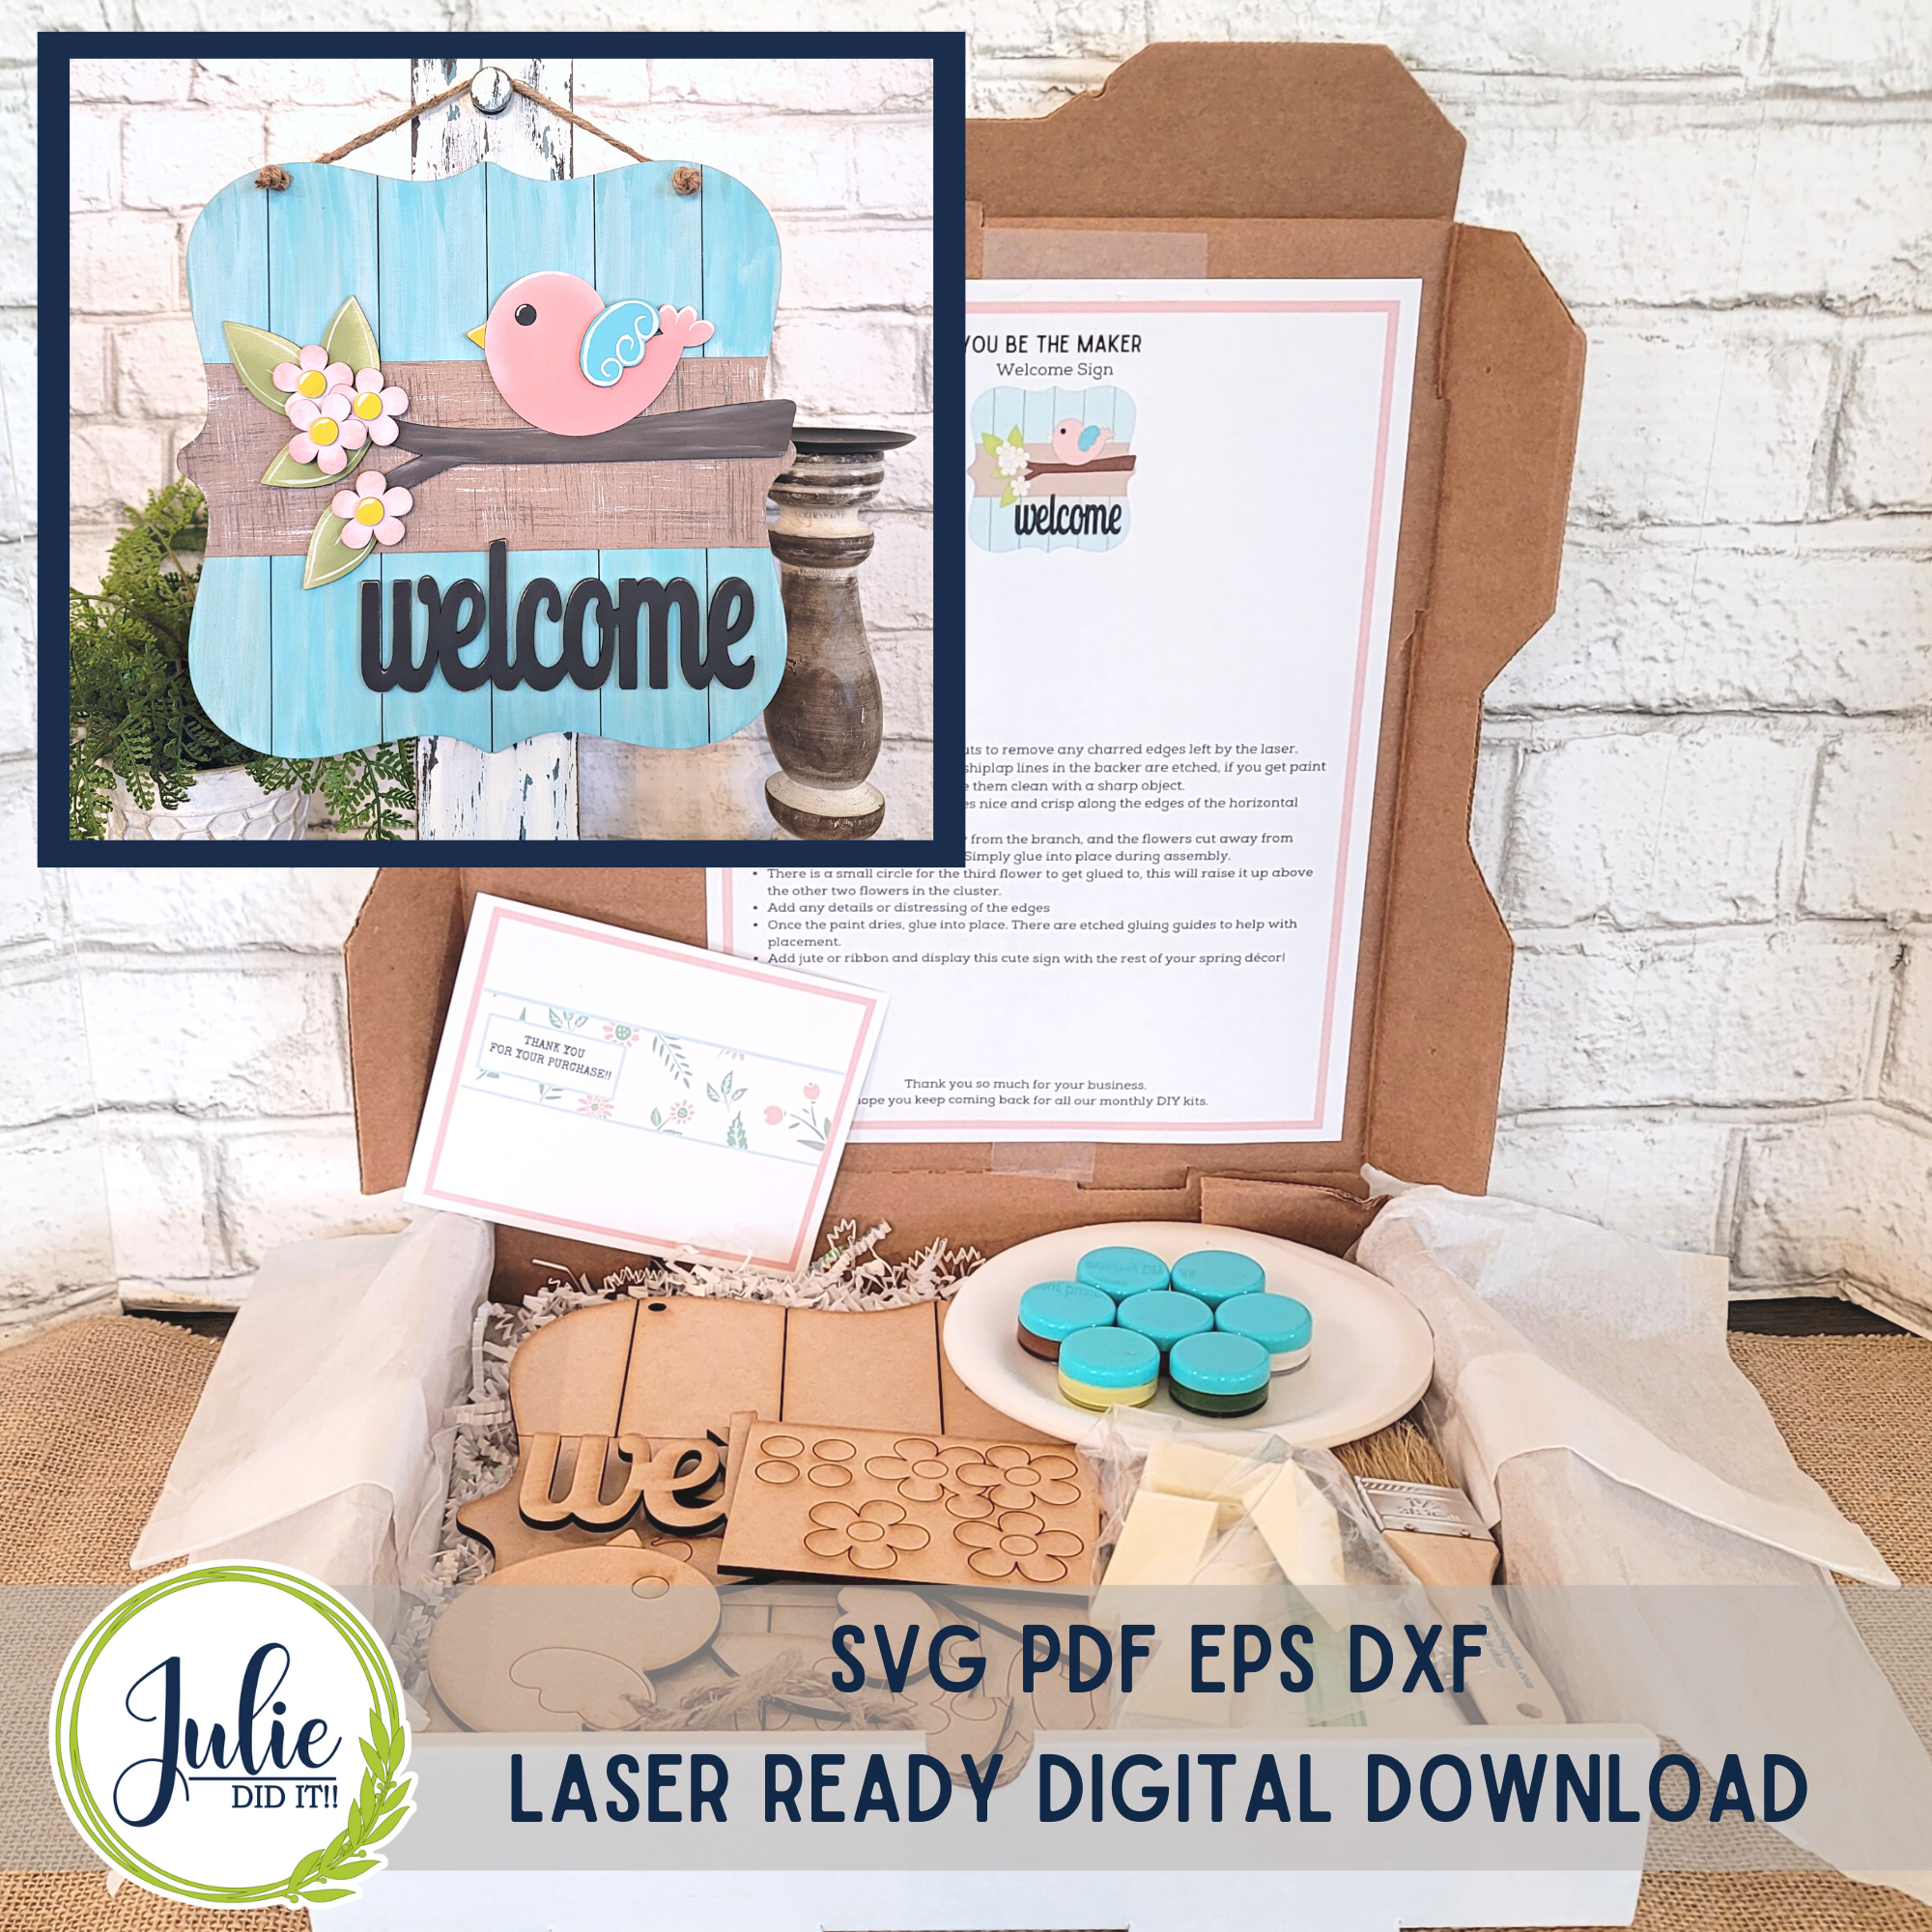 January 2023 - Welcome Sign Exclusive DIY Kit